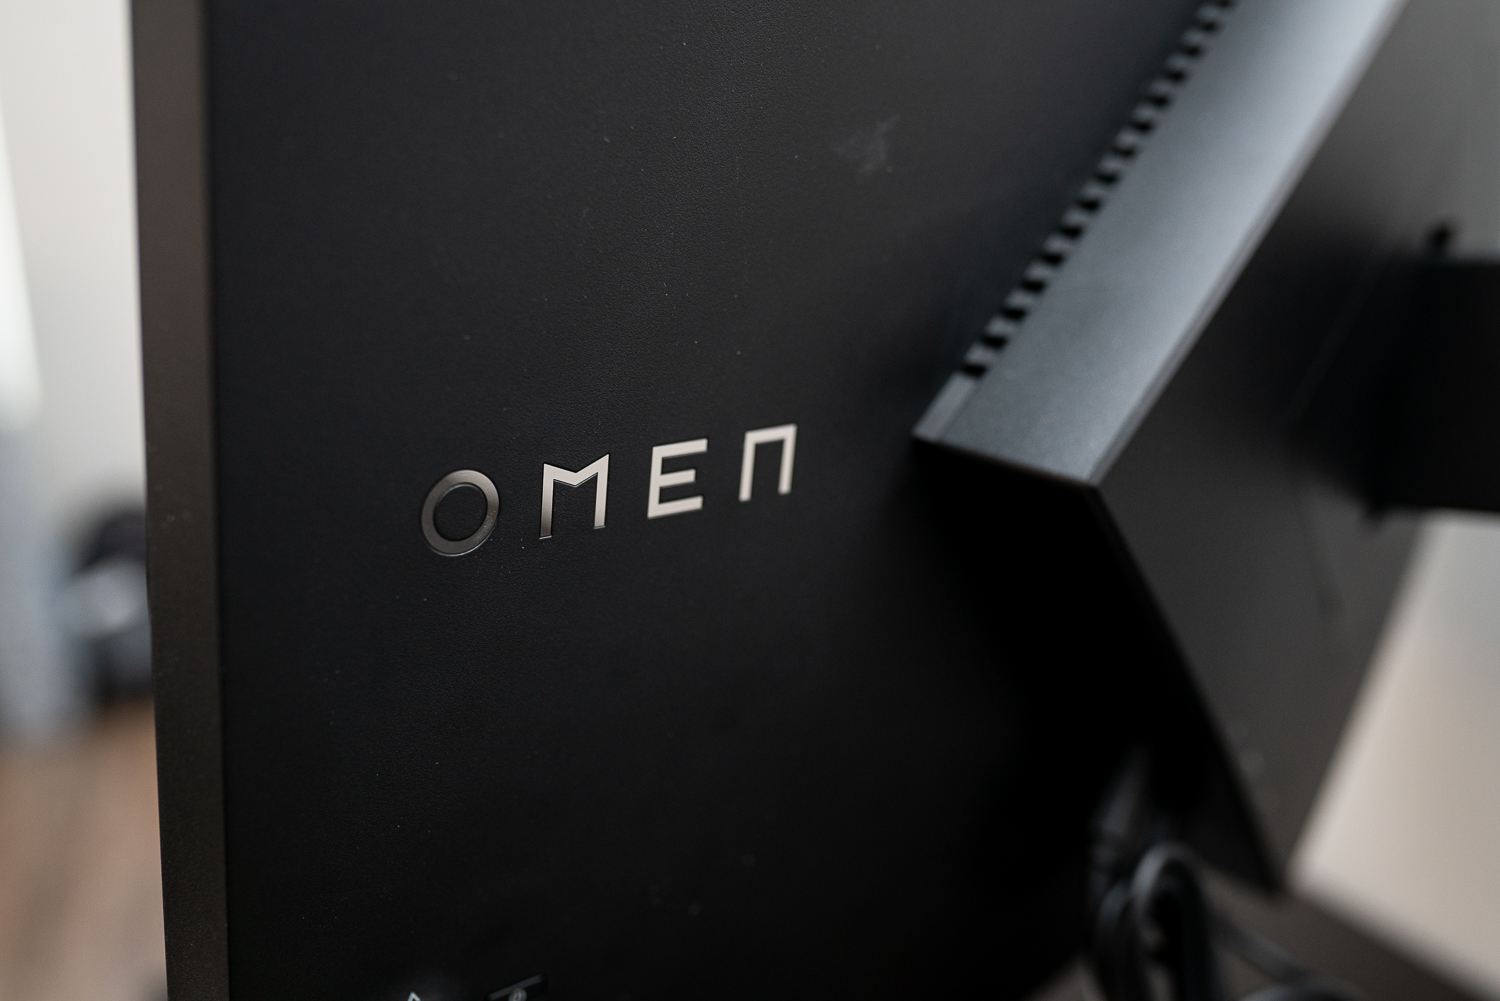 HP Omen 27c review: The Golidocks of gaming monitors